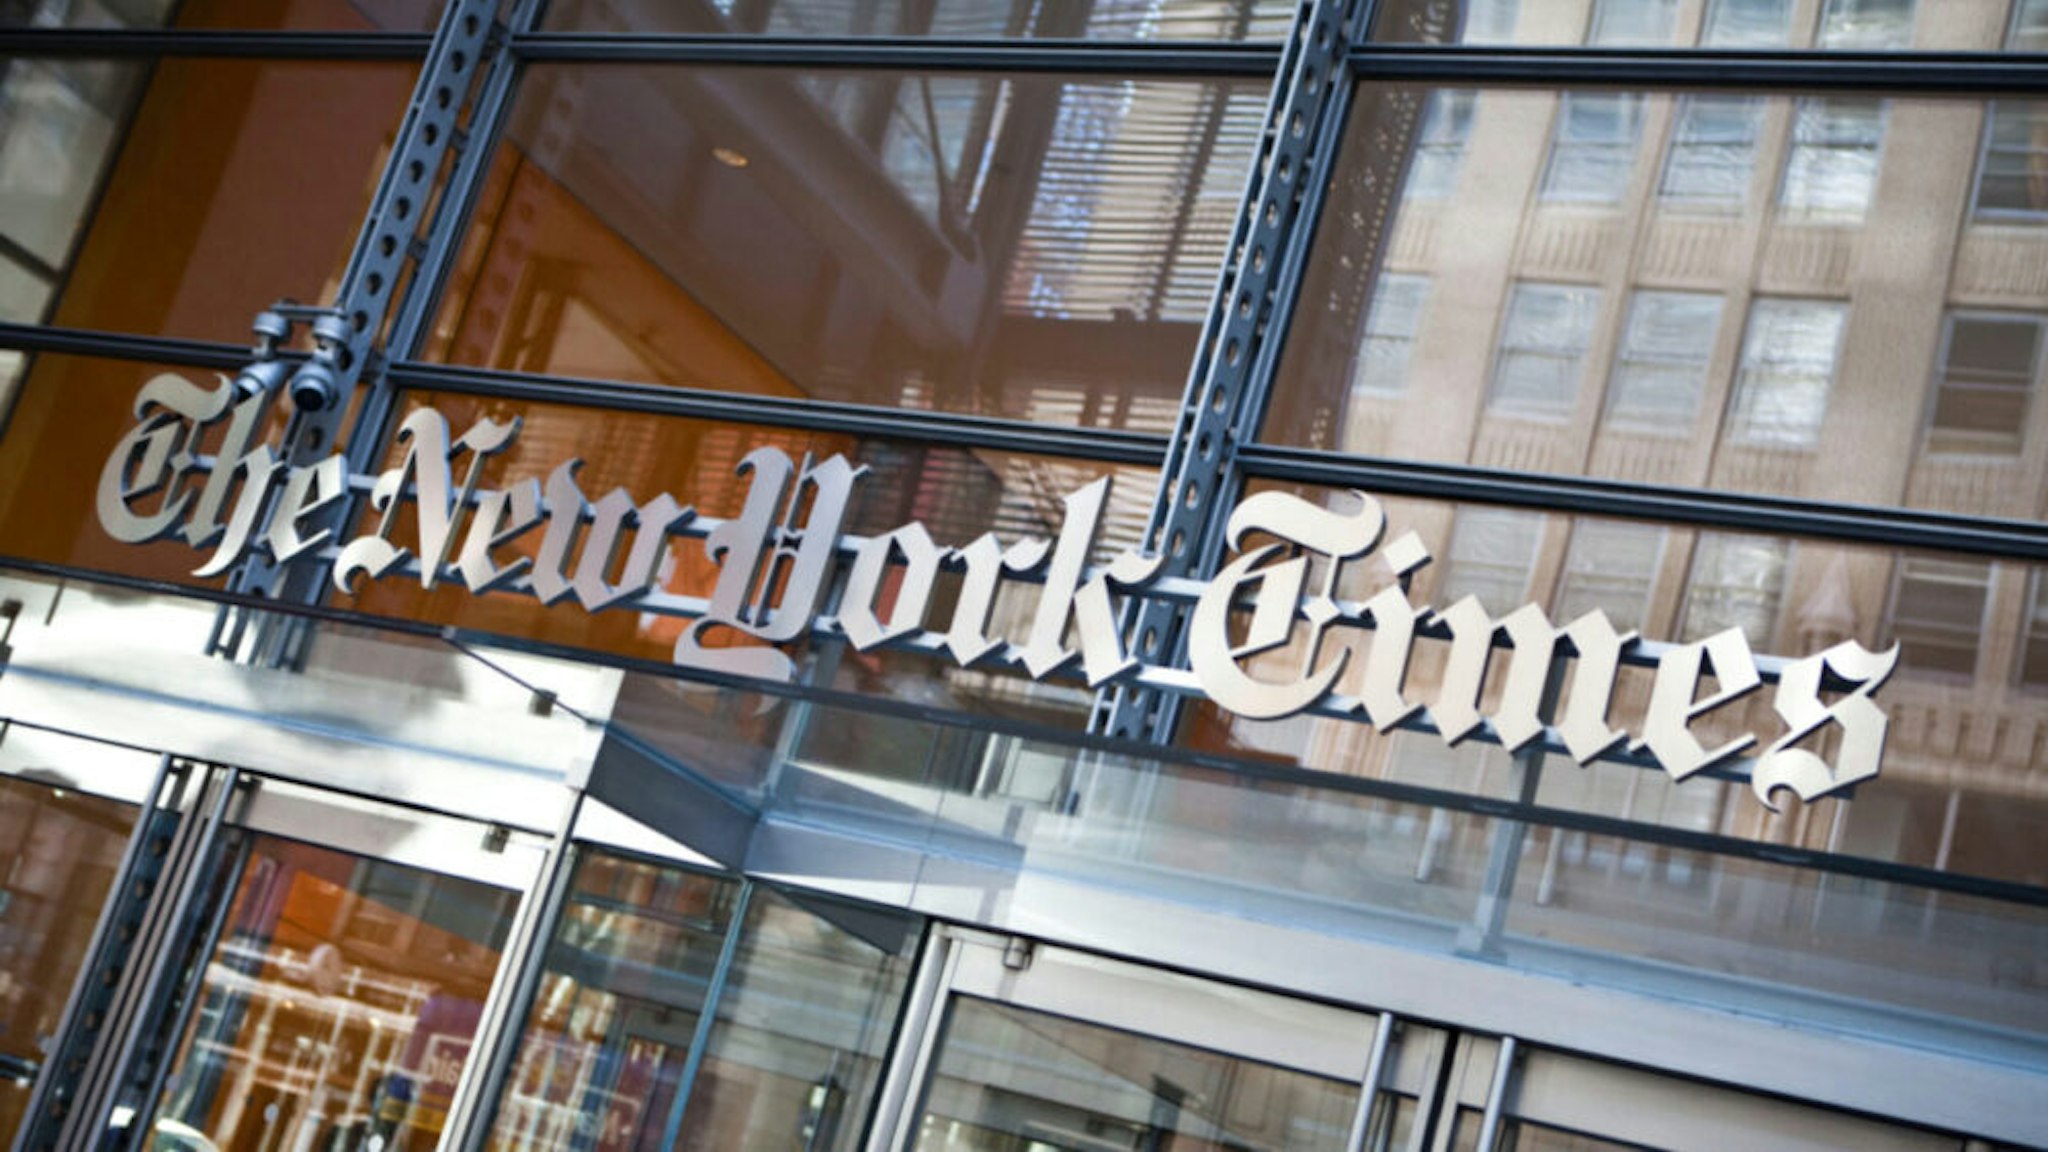 The New York Times logo is seen on the headquarters building on April 21, 2011 in New York City.